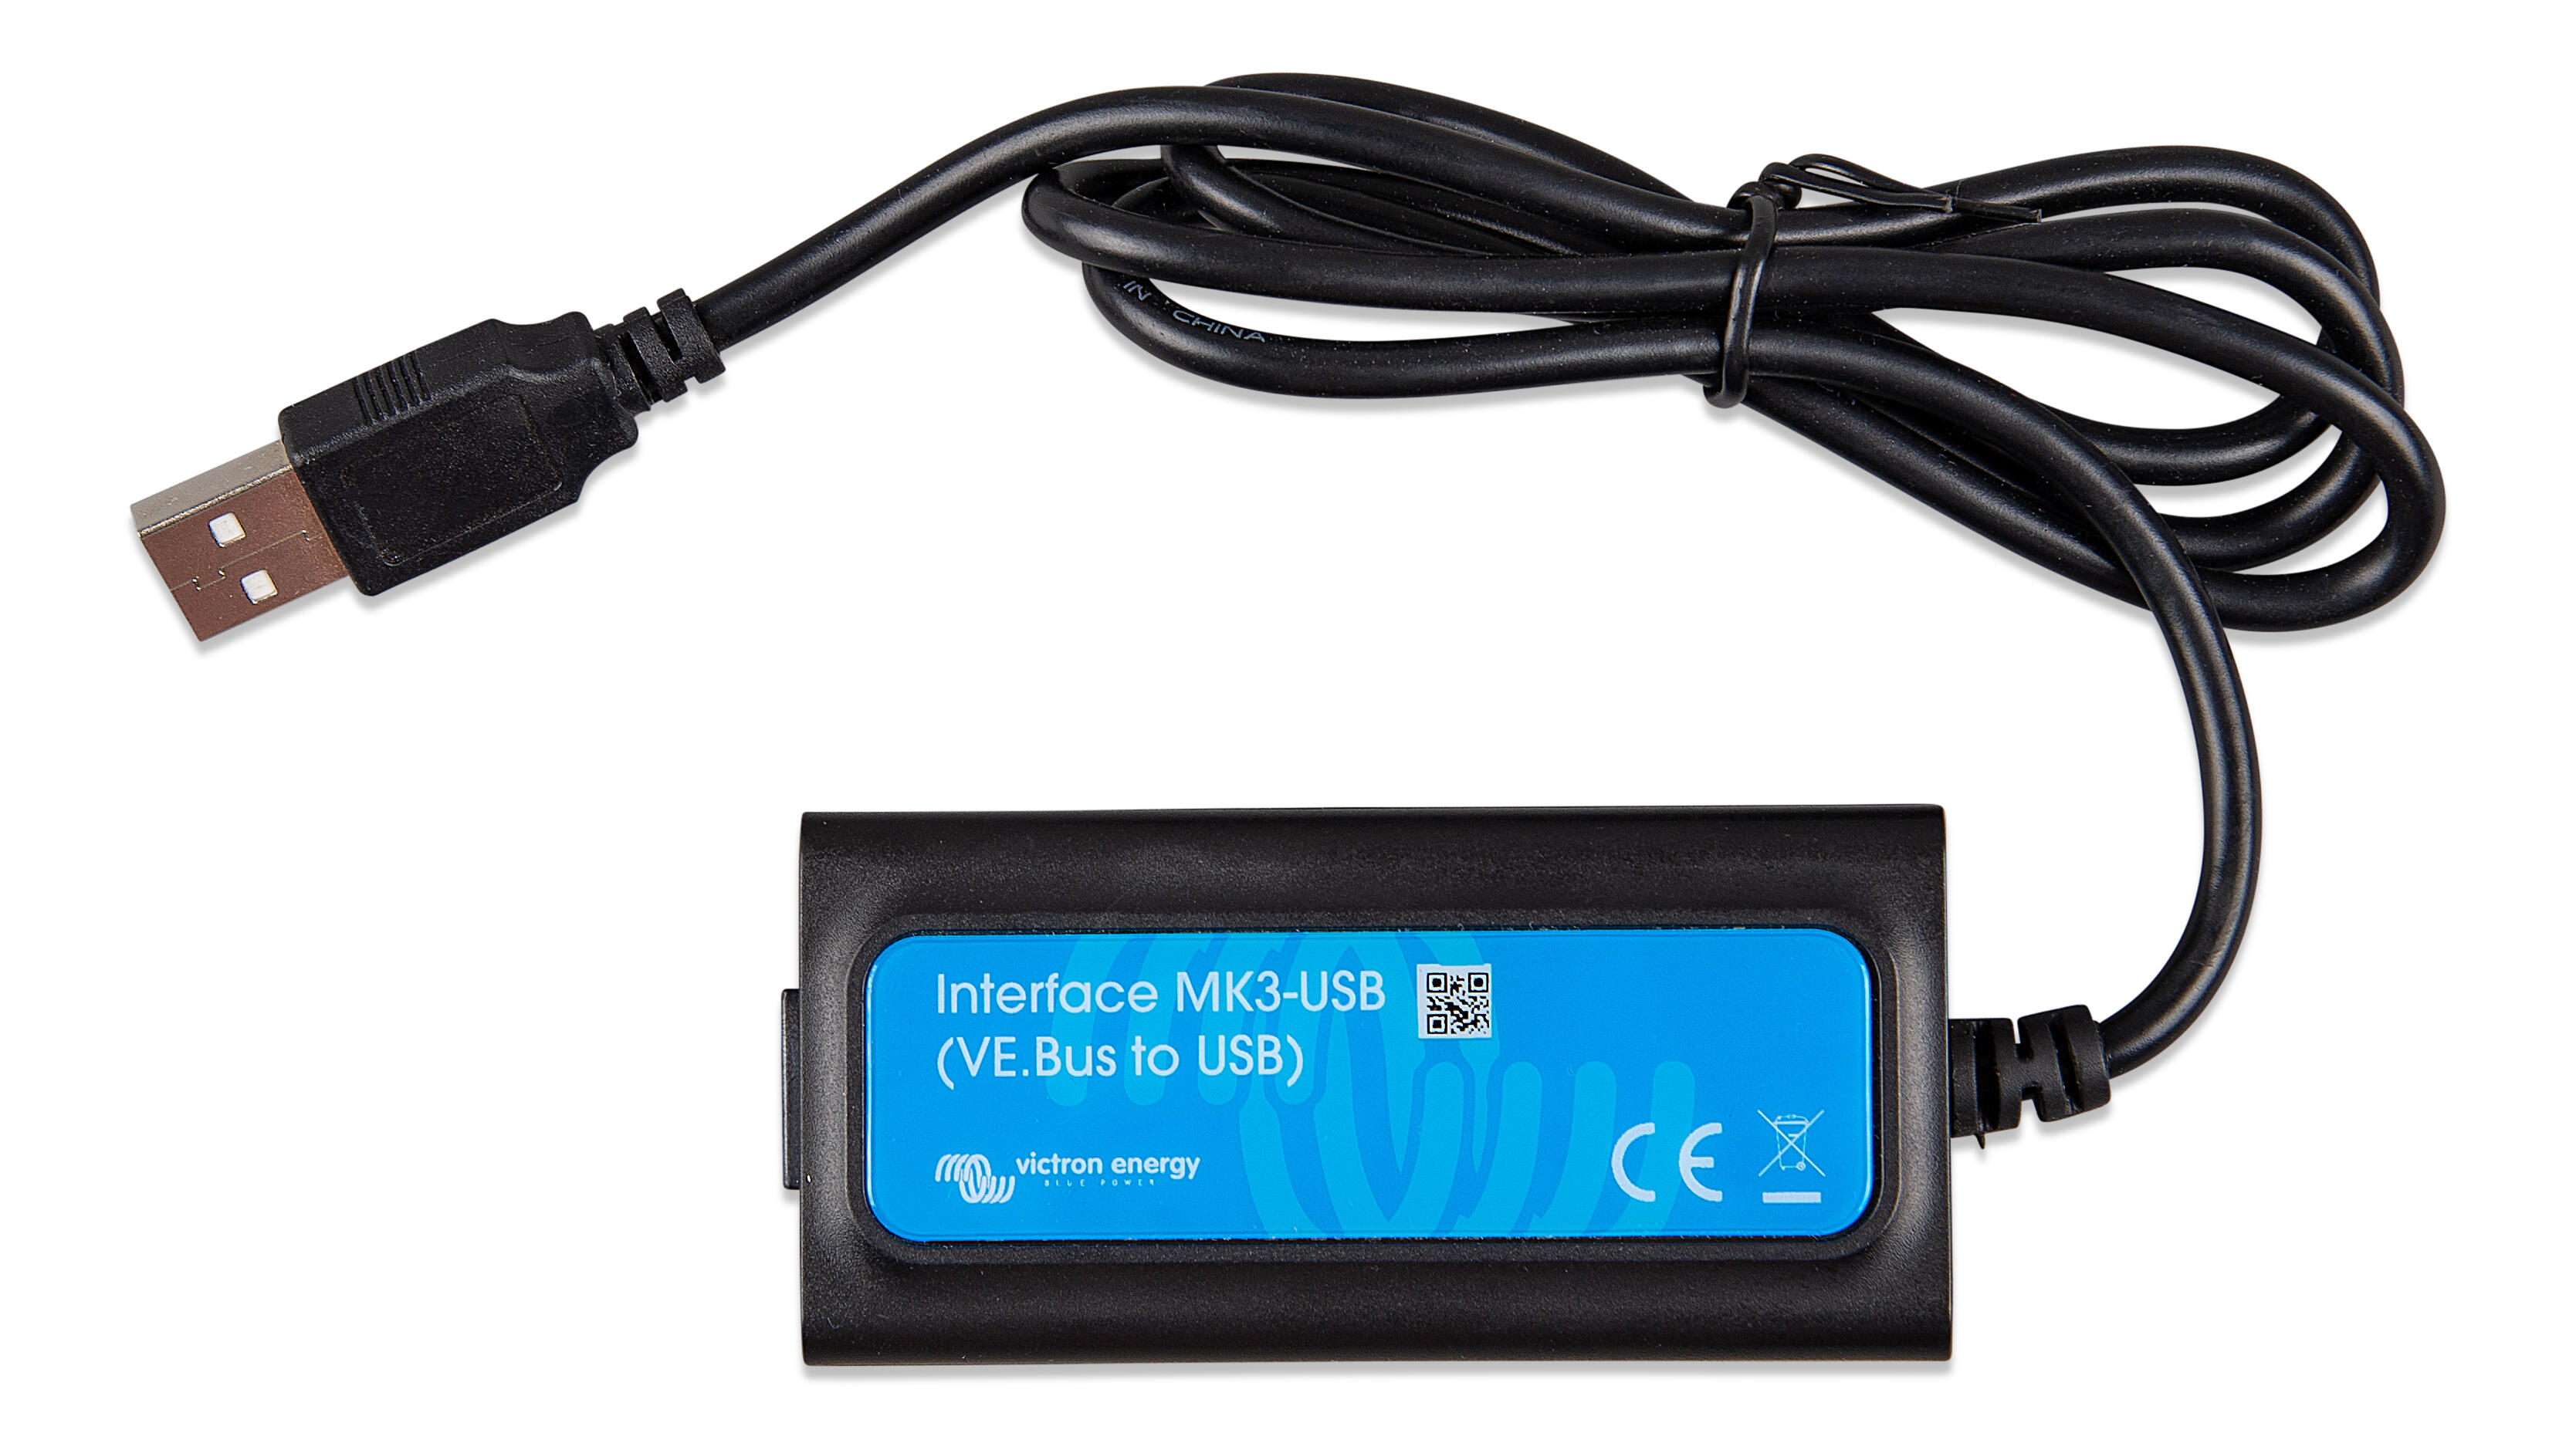 Conector ve.bus a usb interface victron mk3-usb